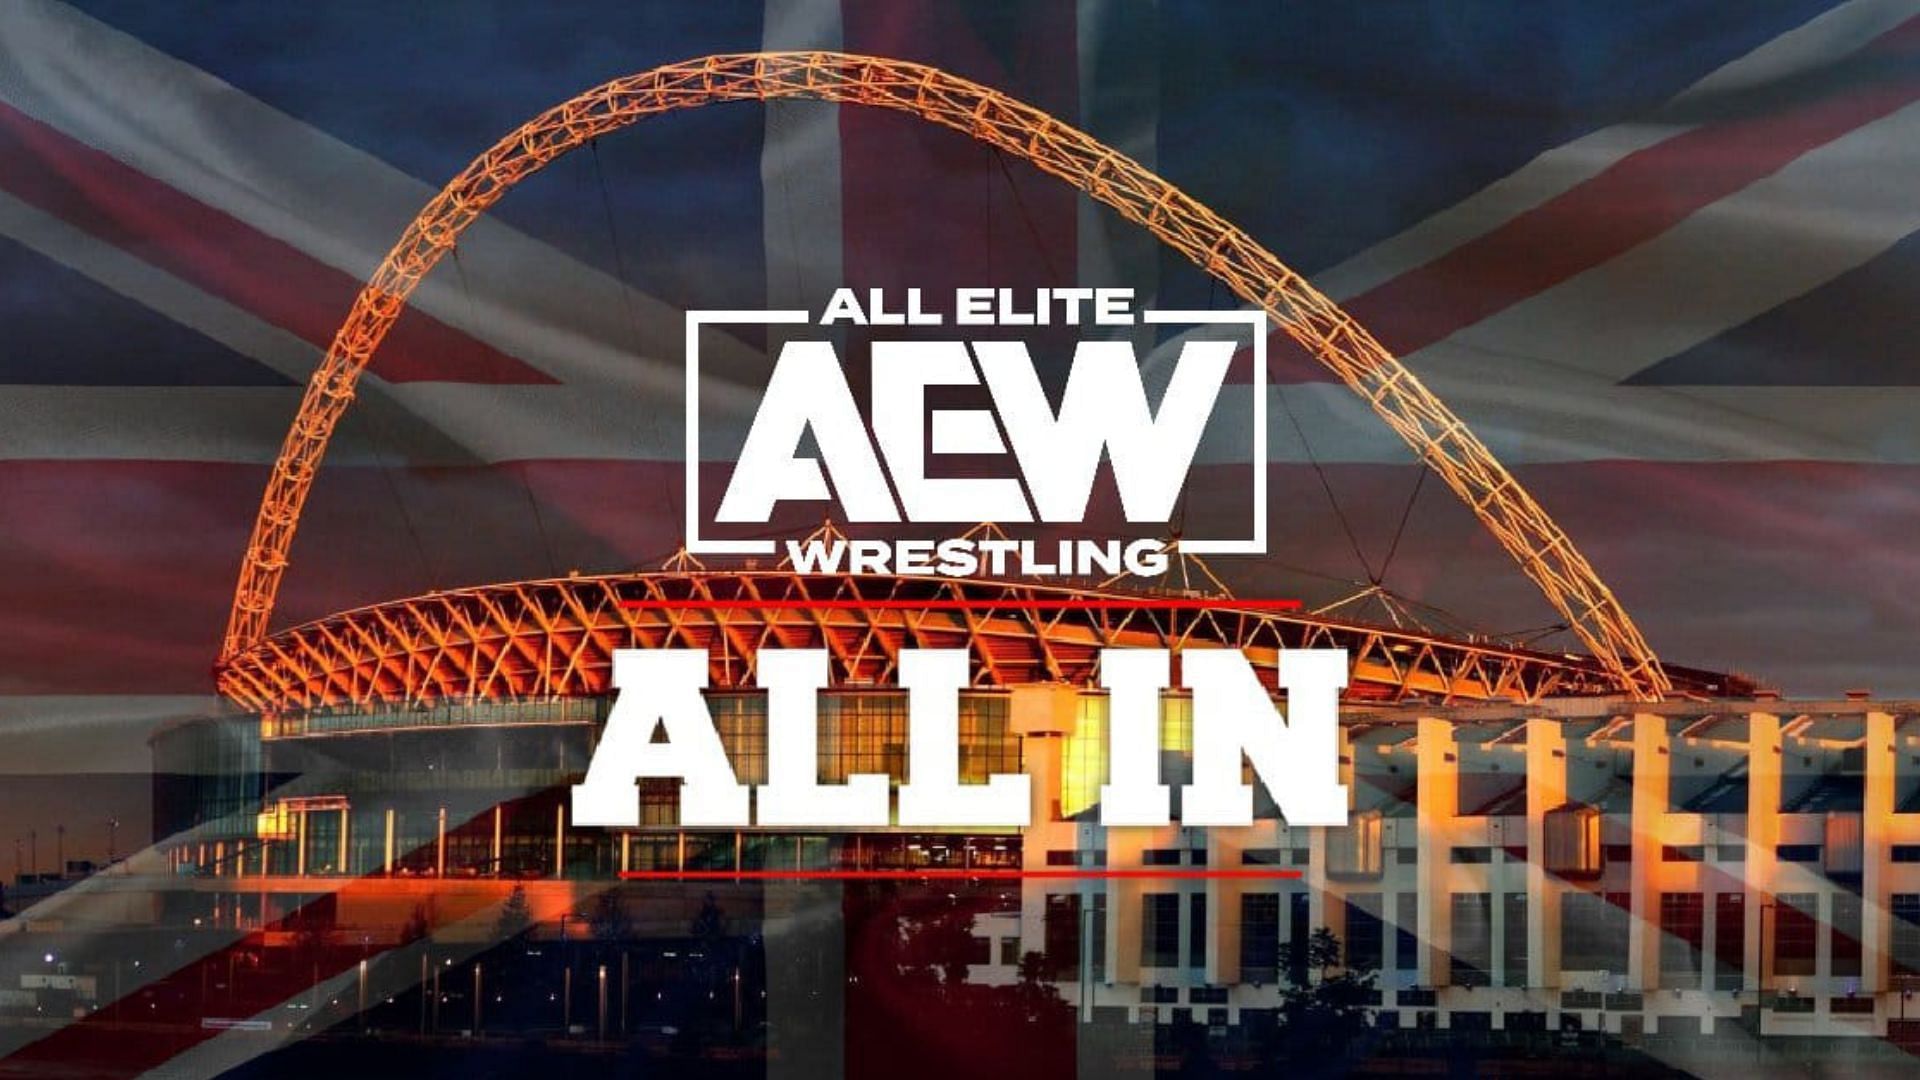 Which former world champion claims they will main event AEW All In?